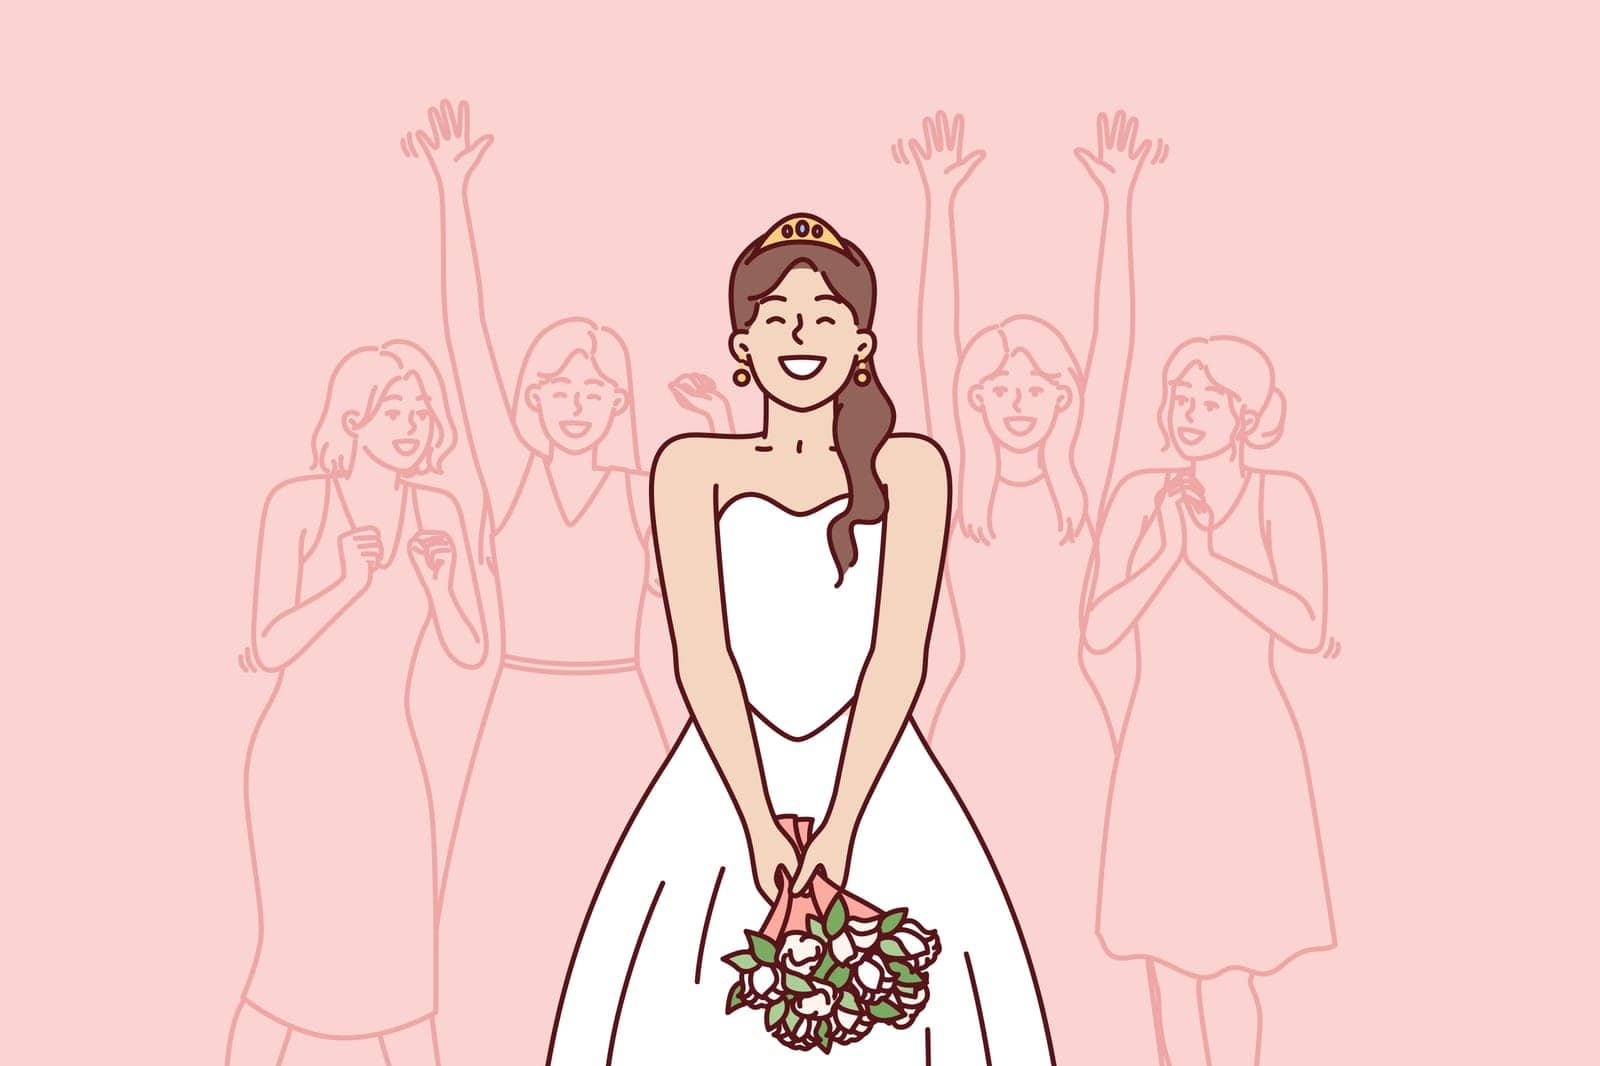 Happy bride preparing to throw bouquet flowers performs traditional ritual for wedding party. Woman in wedding dress stands with back to female girlfriends who want to get married as soon as possible